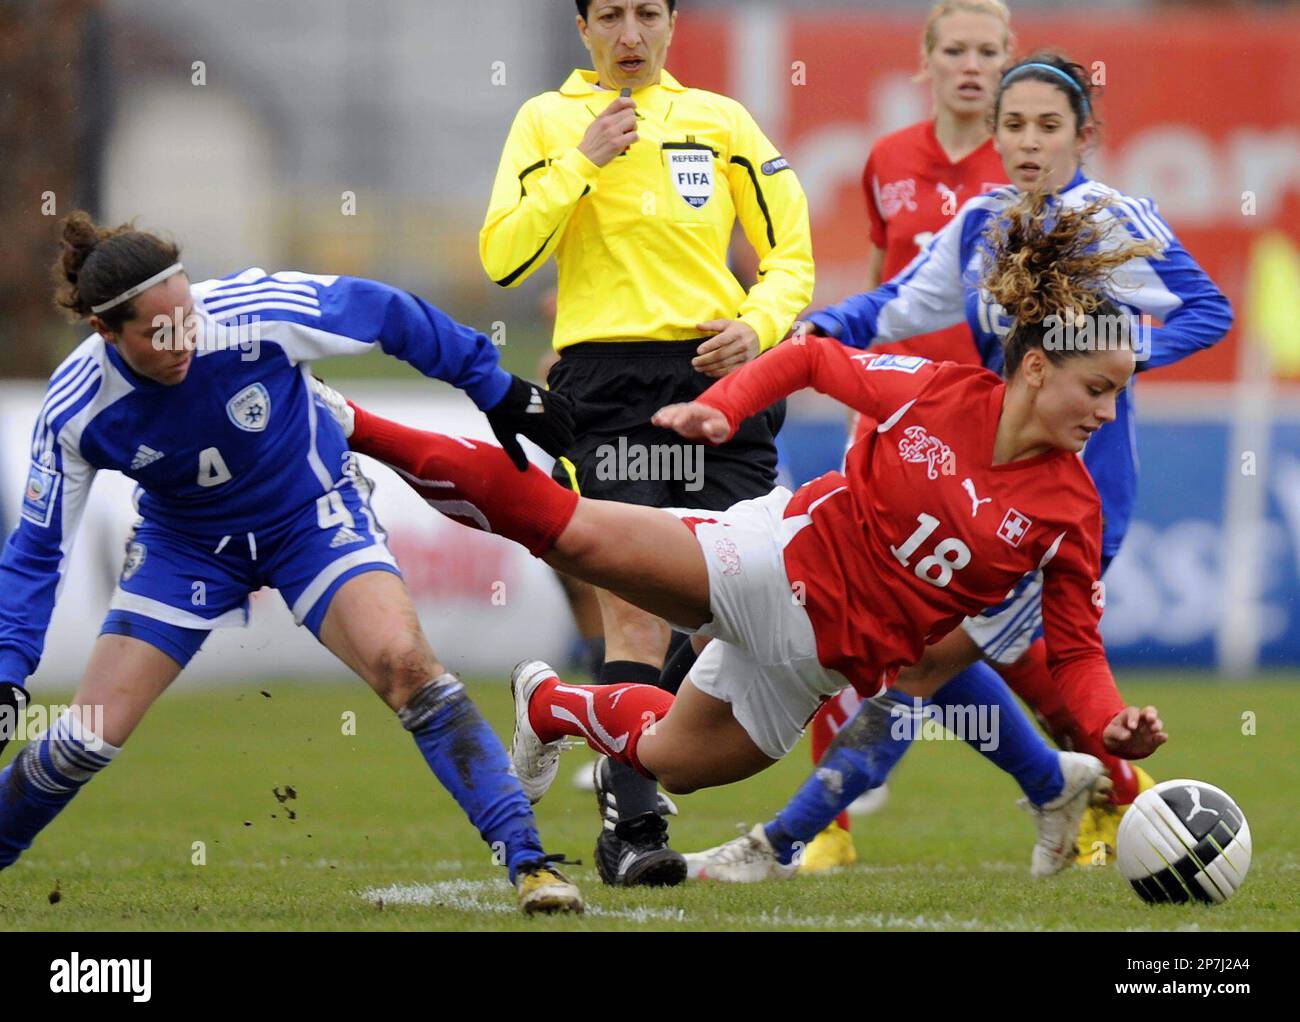 Switzerland's Jehona Mehmeli, right, fights for the ball with Israel's Moran Lavi, left, during the Women's 2011 World Cup qualification game between Switzerland and Israel at the Niedermatten stadium in Wohlen, Switzerland, Saturday, March 27, 2010. (AP Photo/Keystone/Walter Bieri) Stock Photo